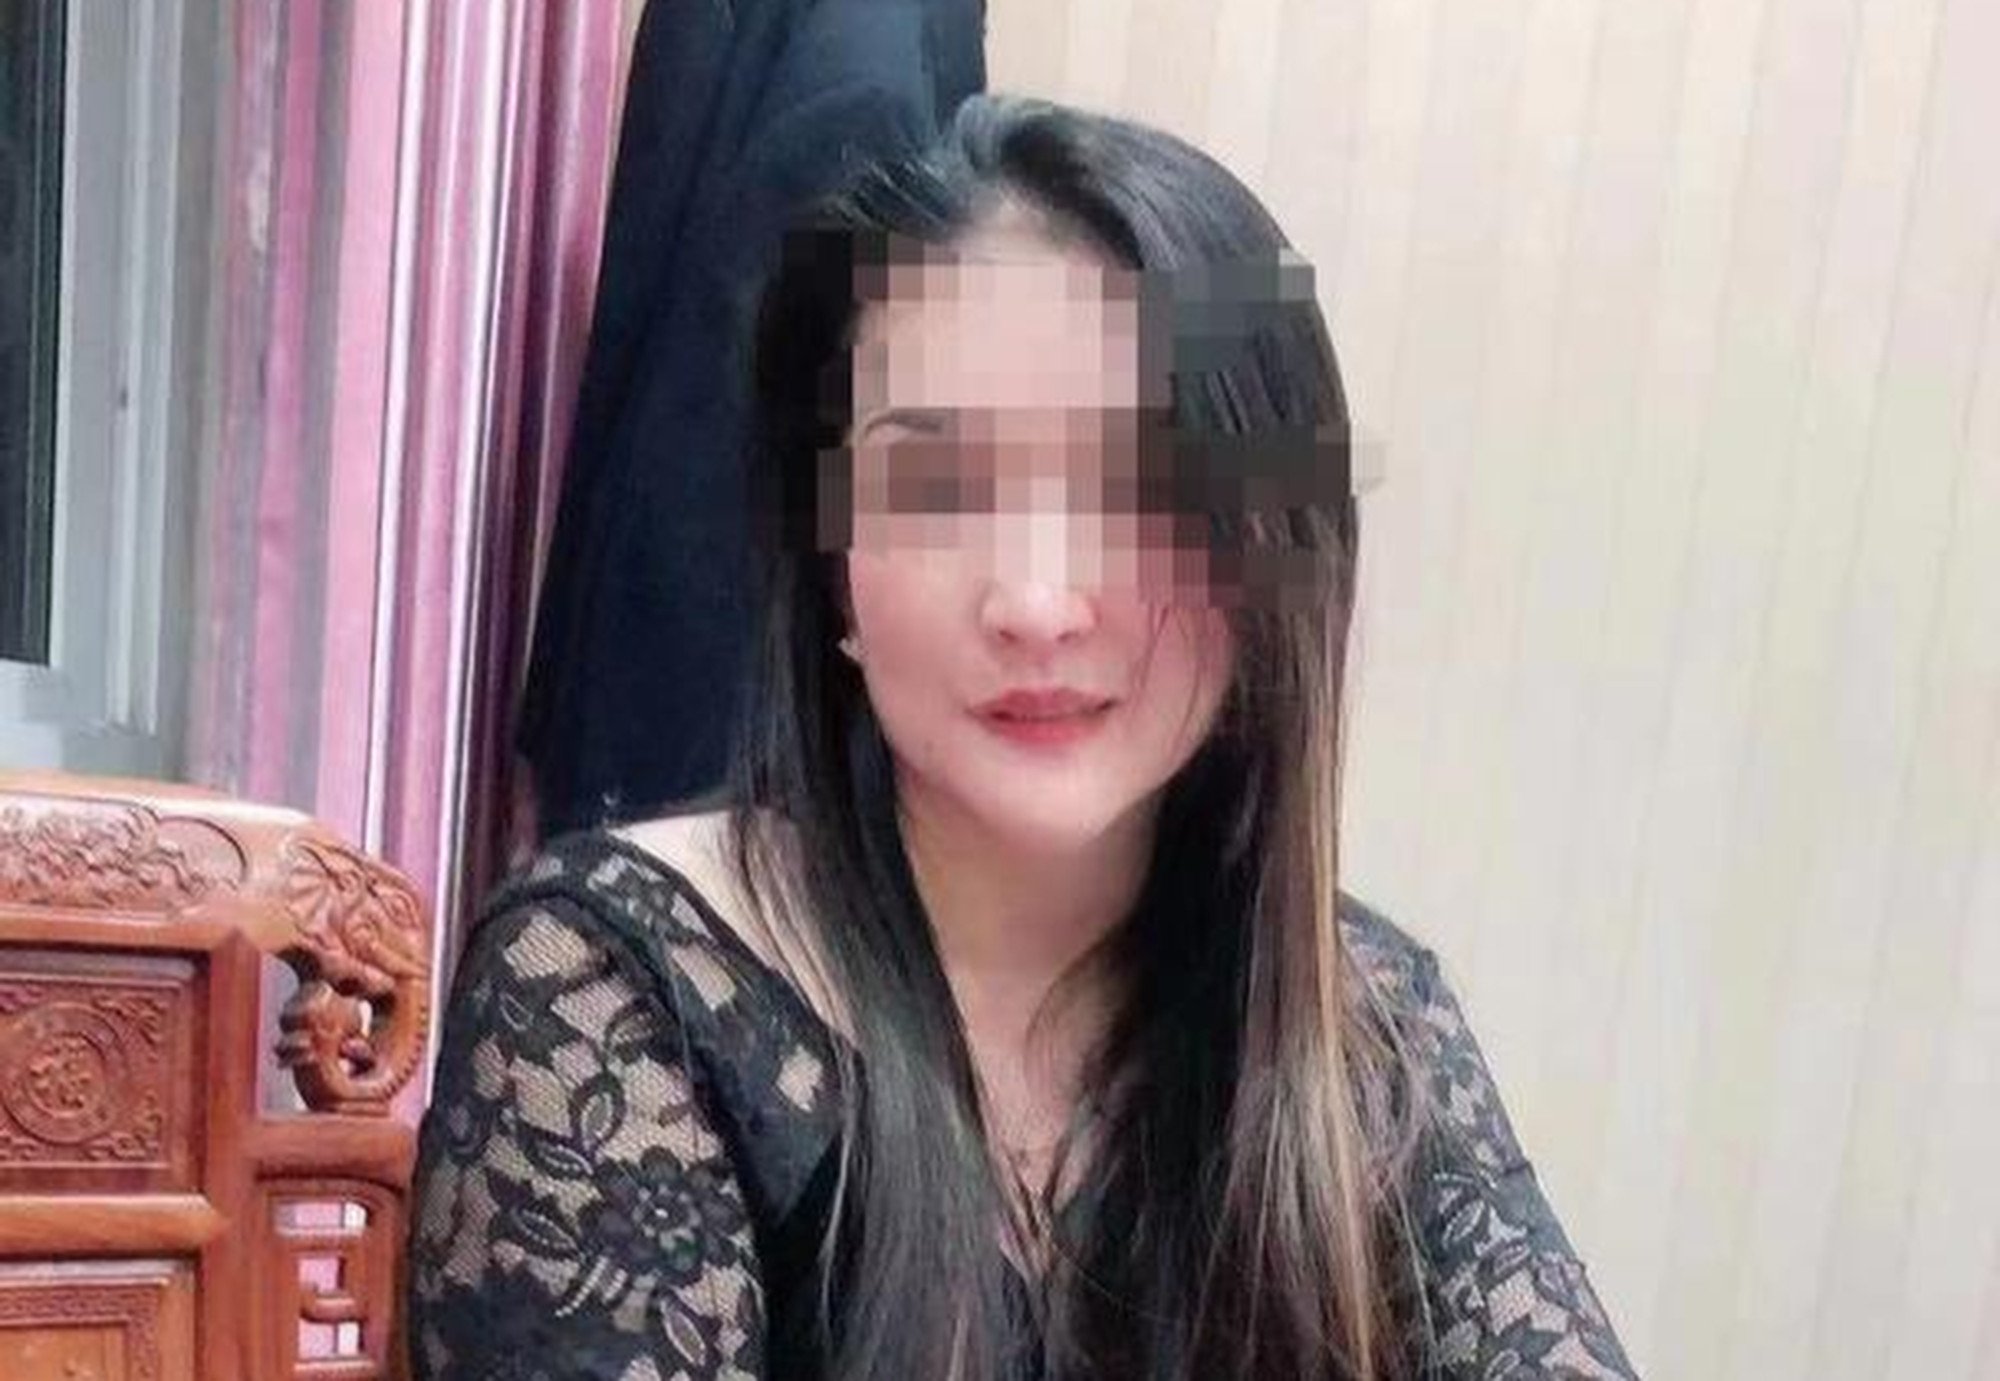 mother of 3 in china dies during liposuction surgery after medical staff assume monitor warning alarm is faulty